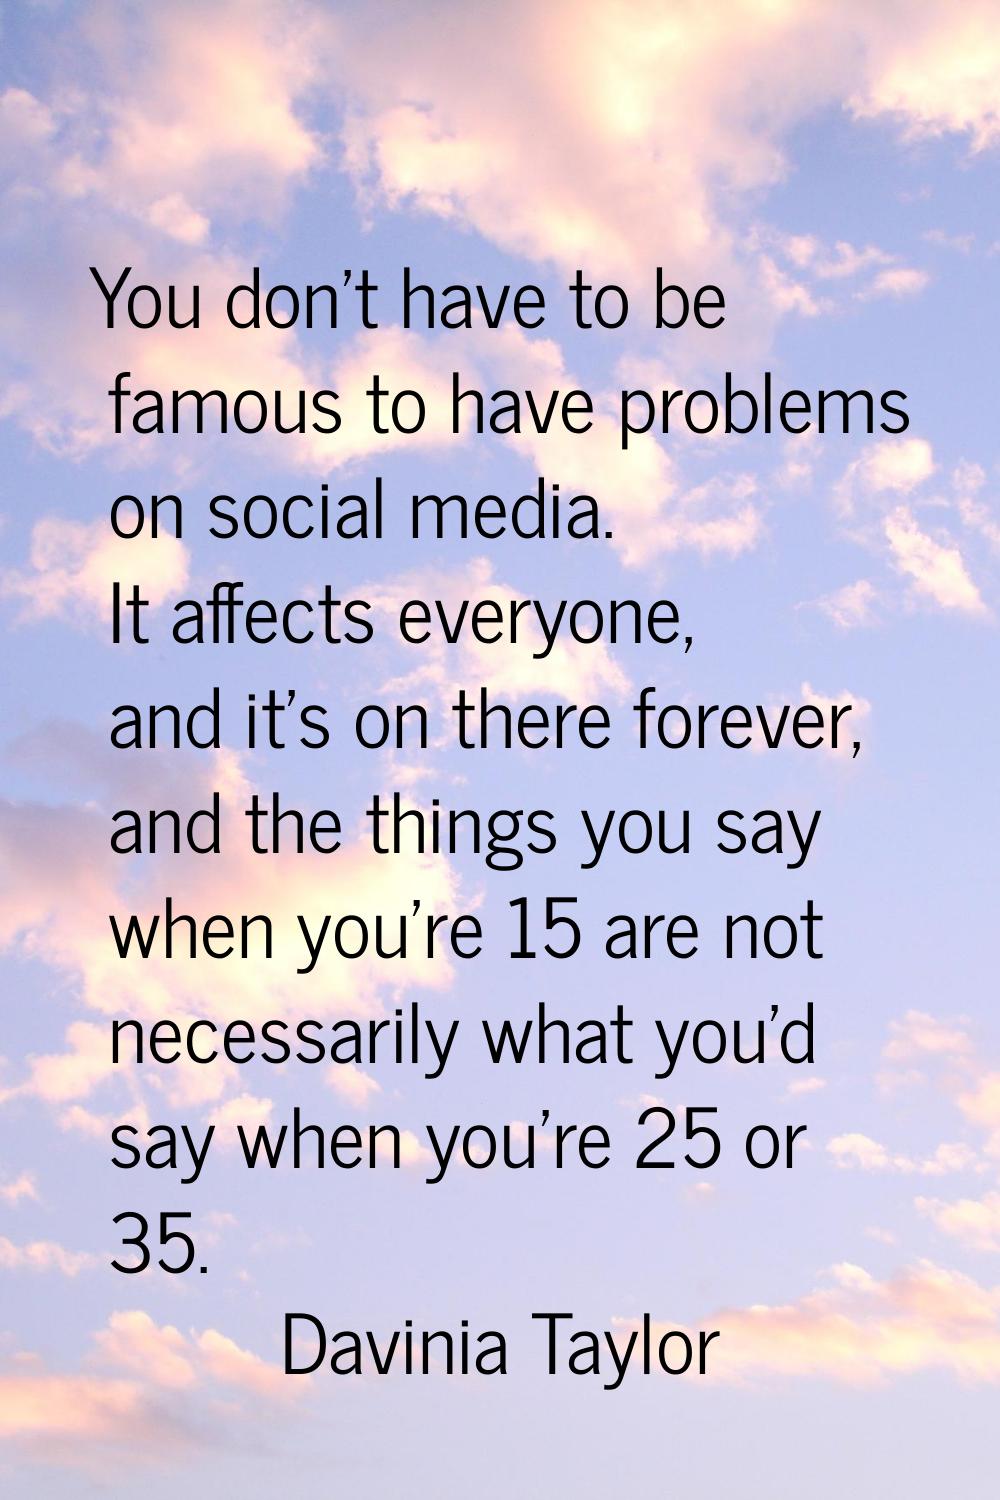 You don't have to be famous to have problems on social media. It affects everyone, and it's on ther